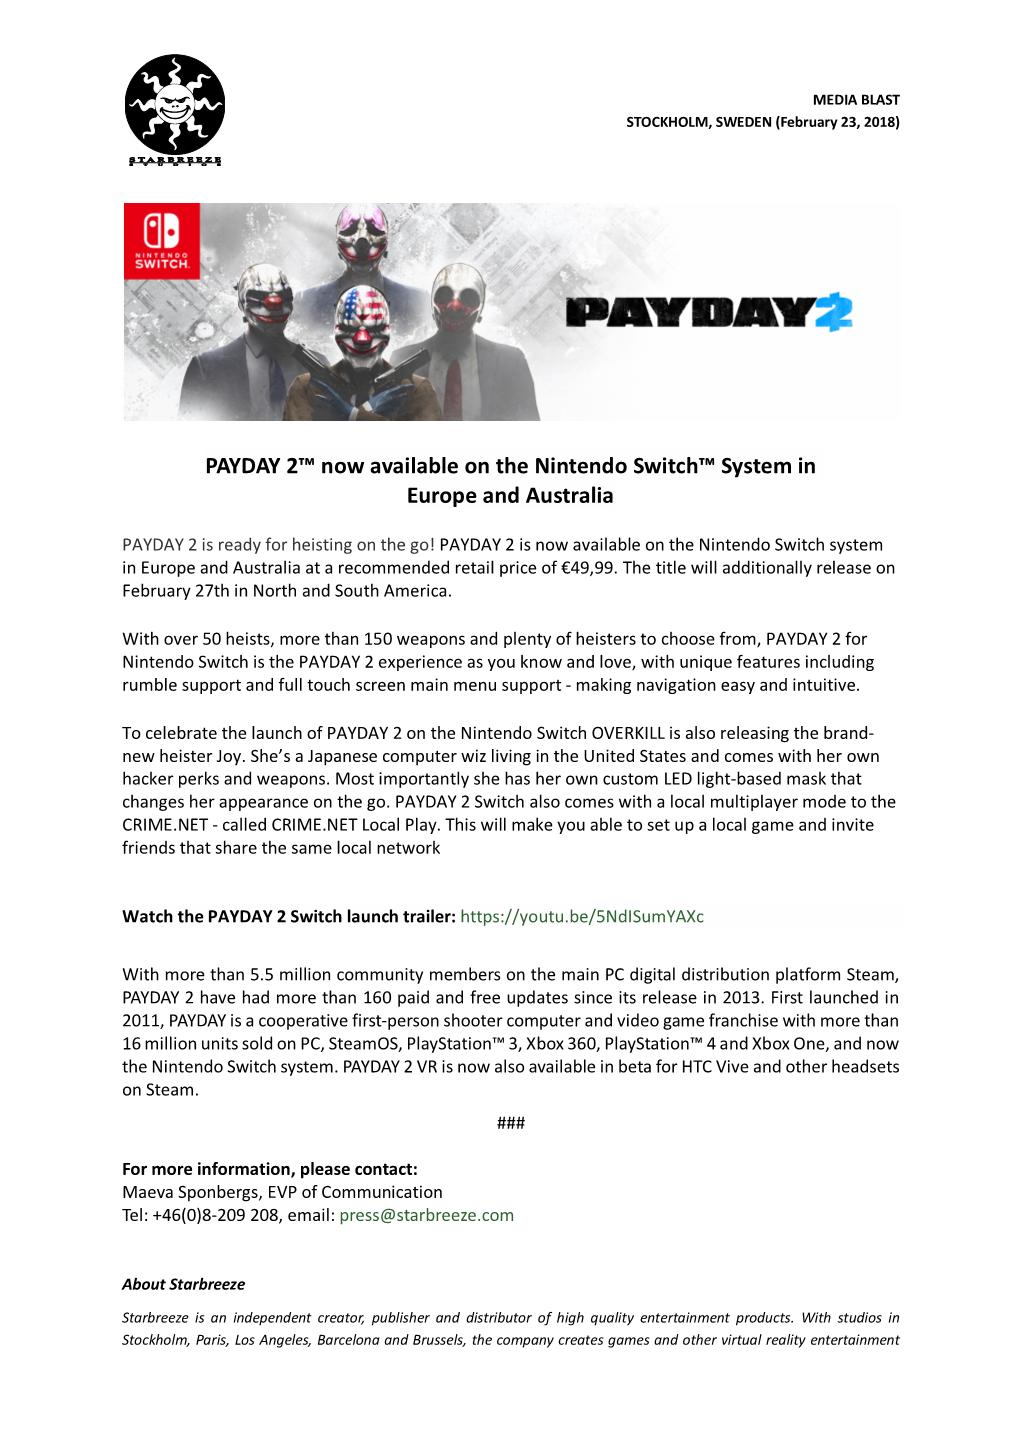 2018-02-23 PAYDAY 2 out NOW on the Nintendo Switch System EU